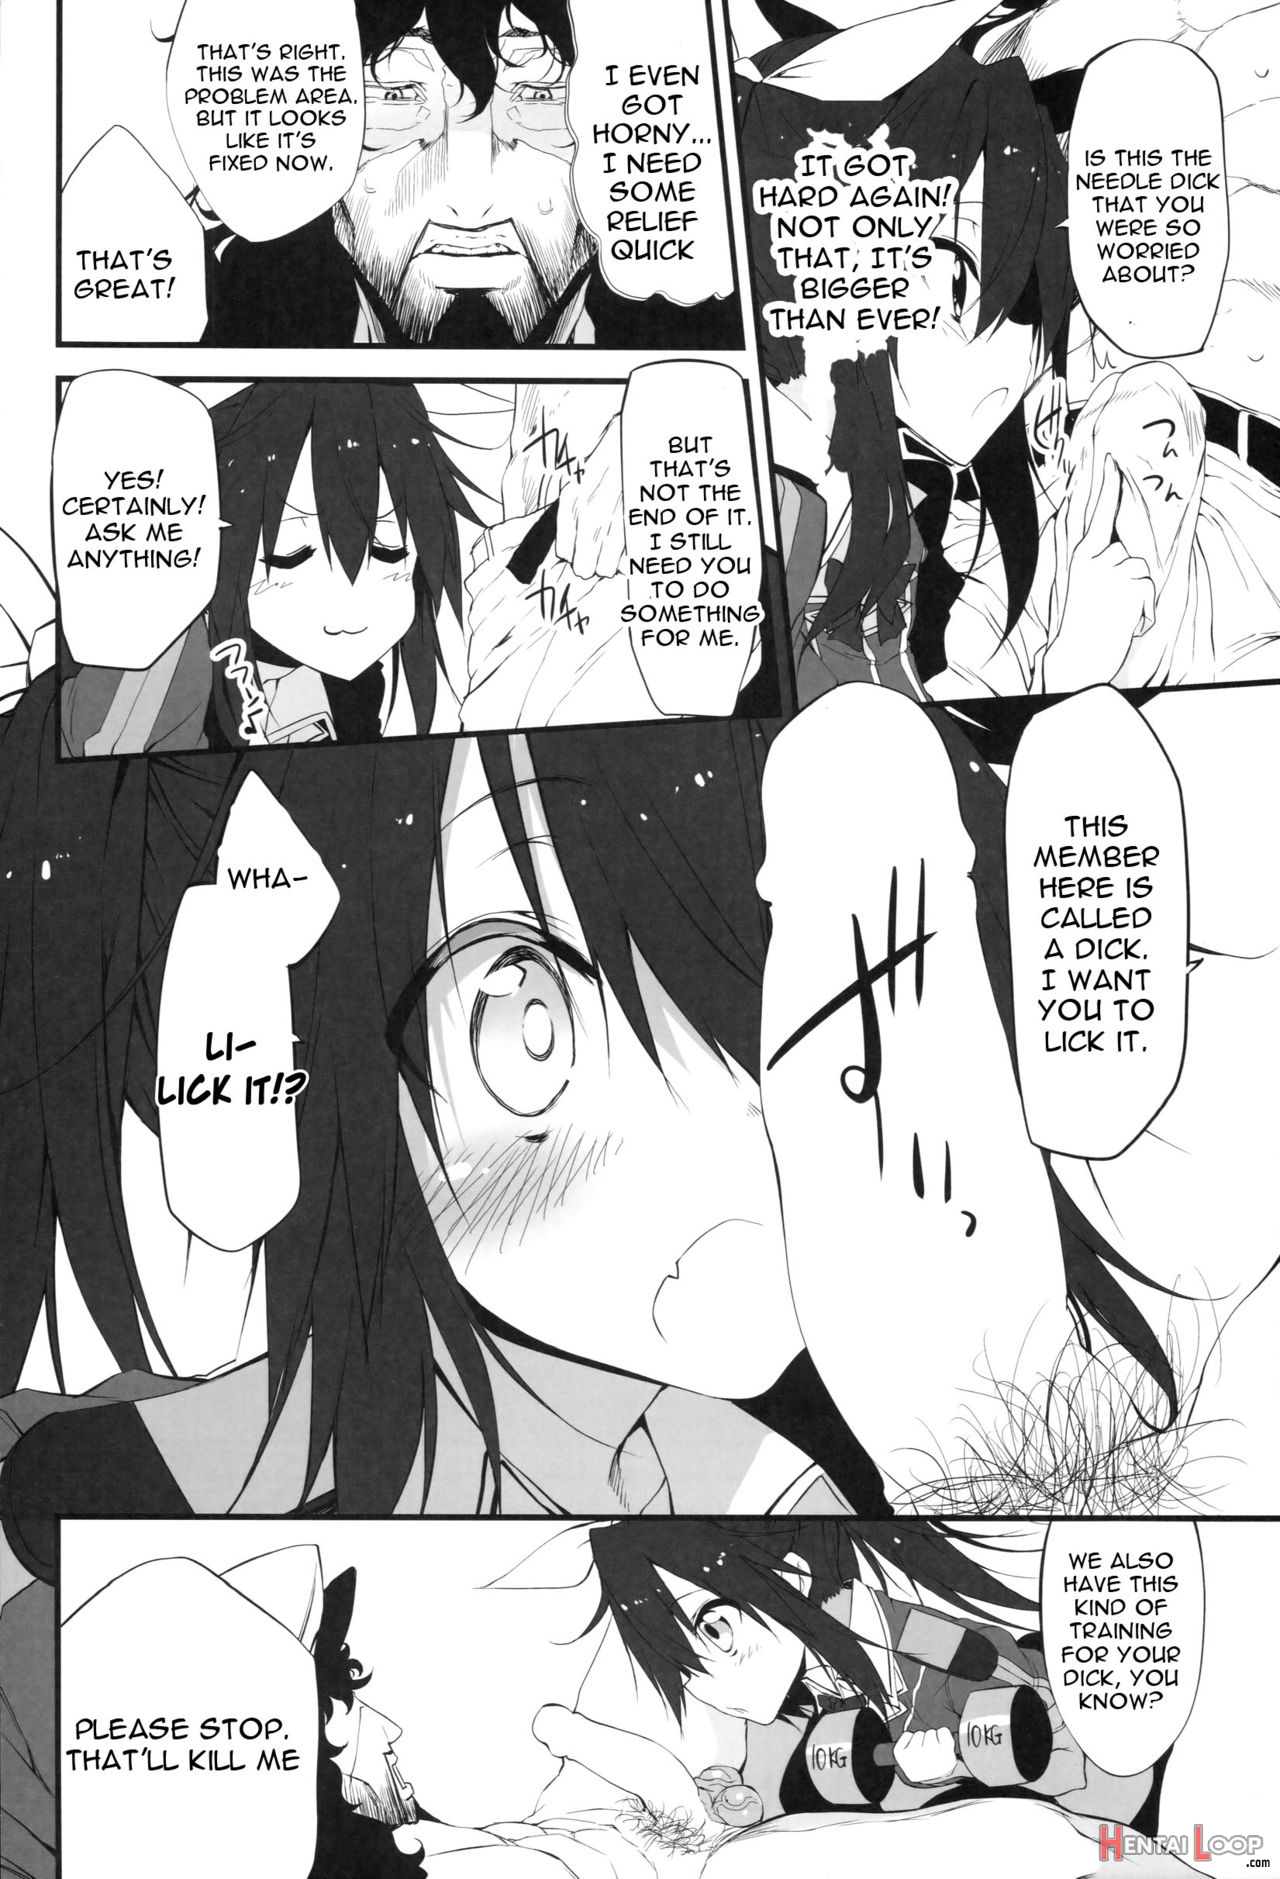 Marked Girls Vol. 2 page 7